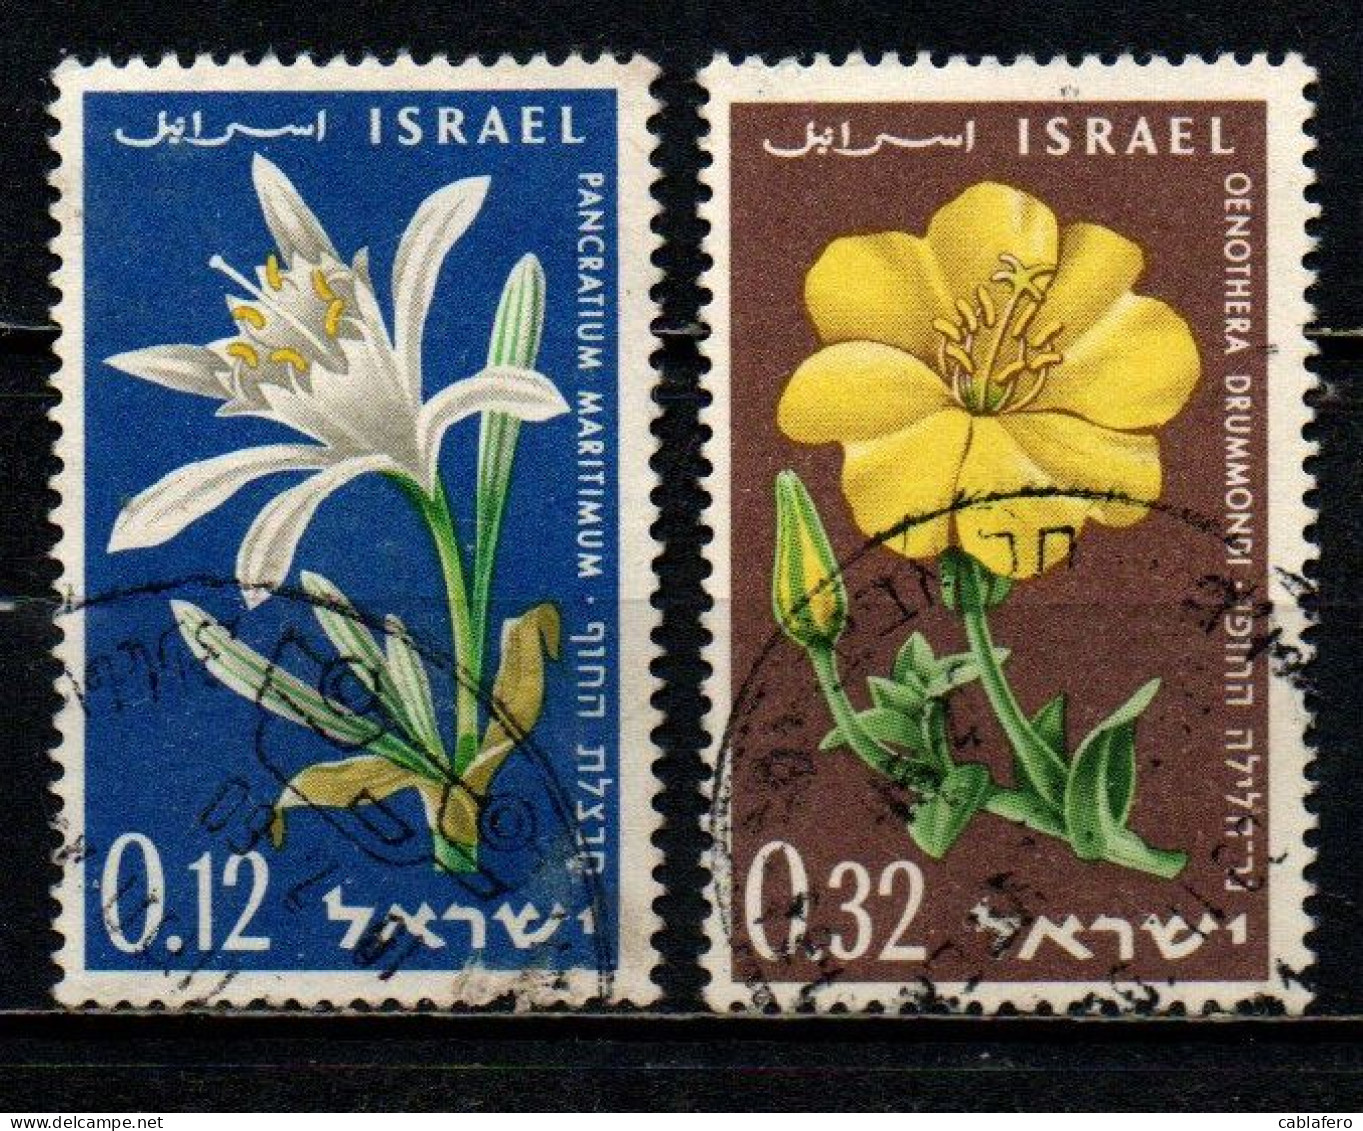 ISRAELE - 1960 - Sand Lily And Evening Primrose - Memorial Day; Proclamation Of State Of Israel, 12th Anniv - USATI - Gebruikt (zonder Tabs)